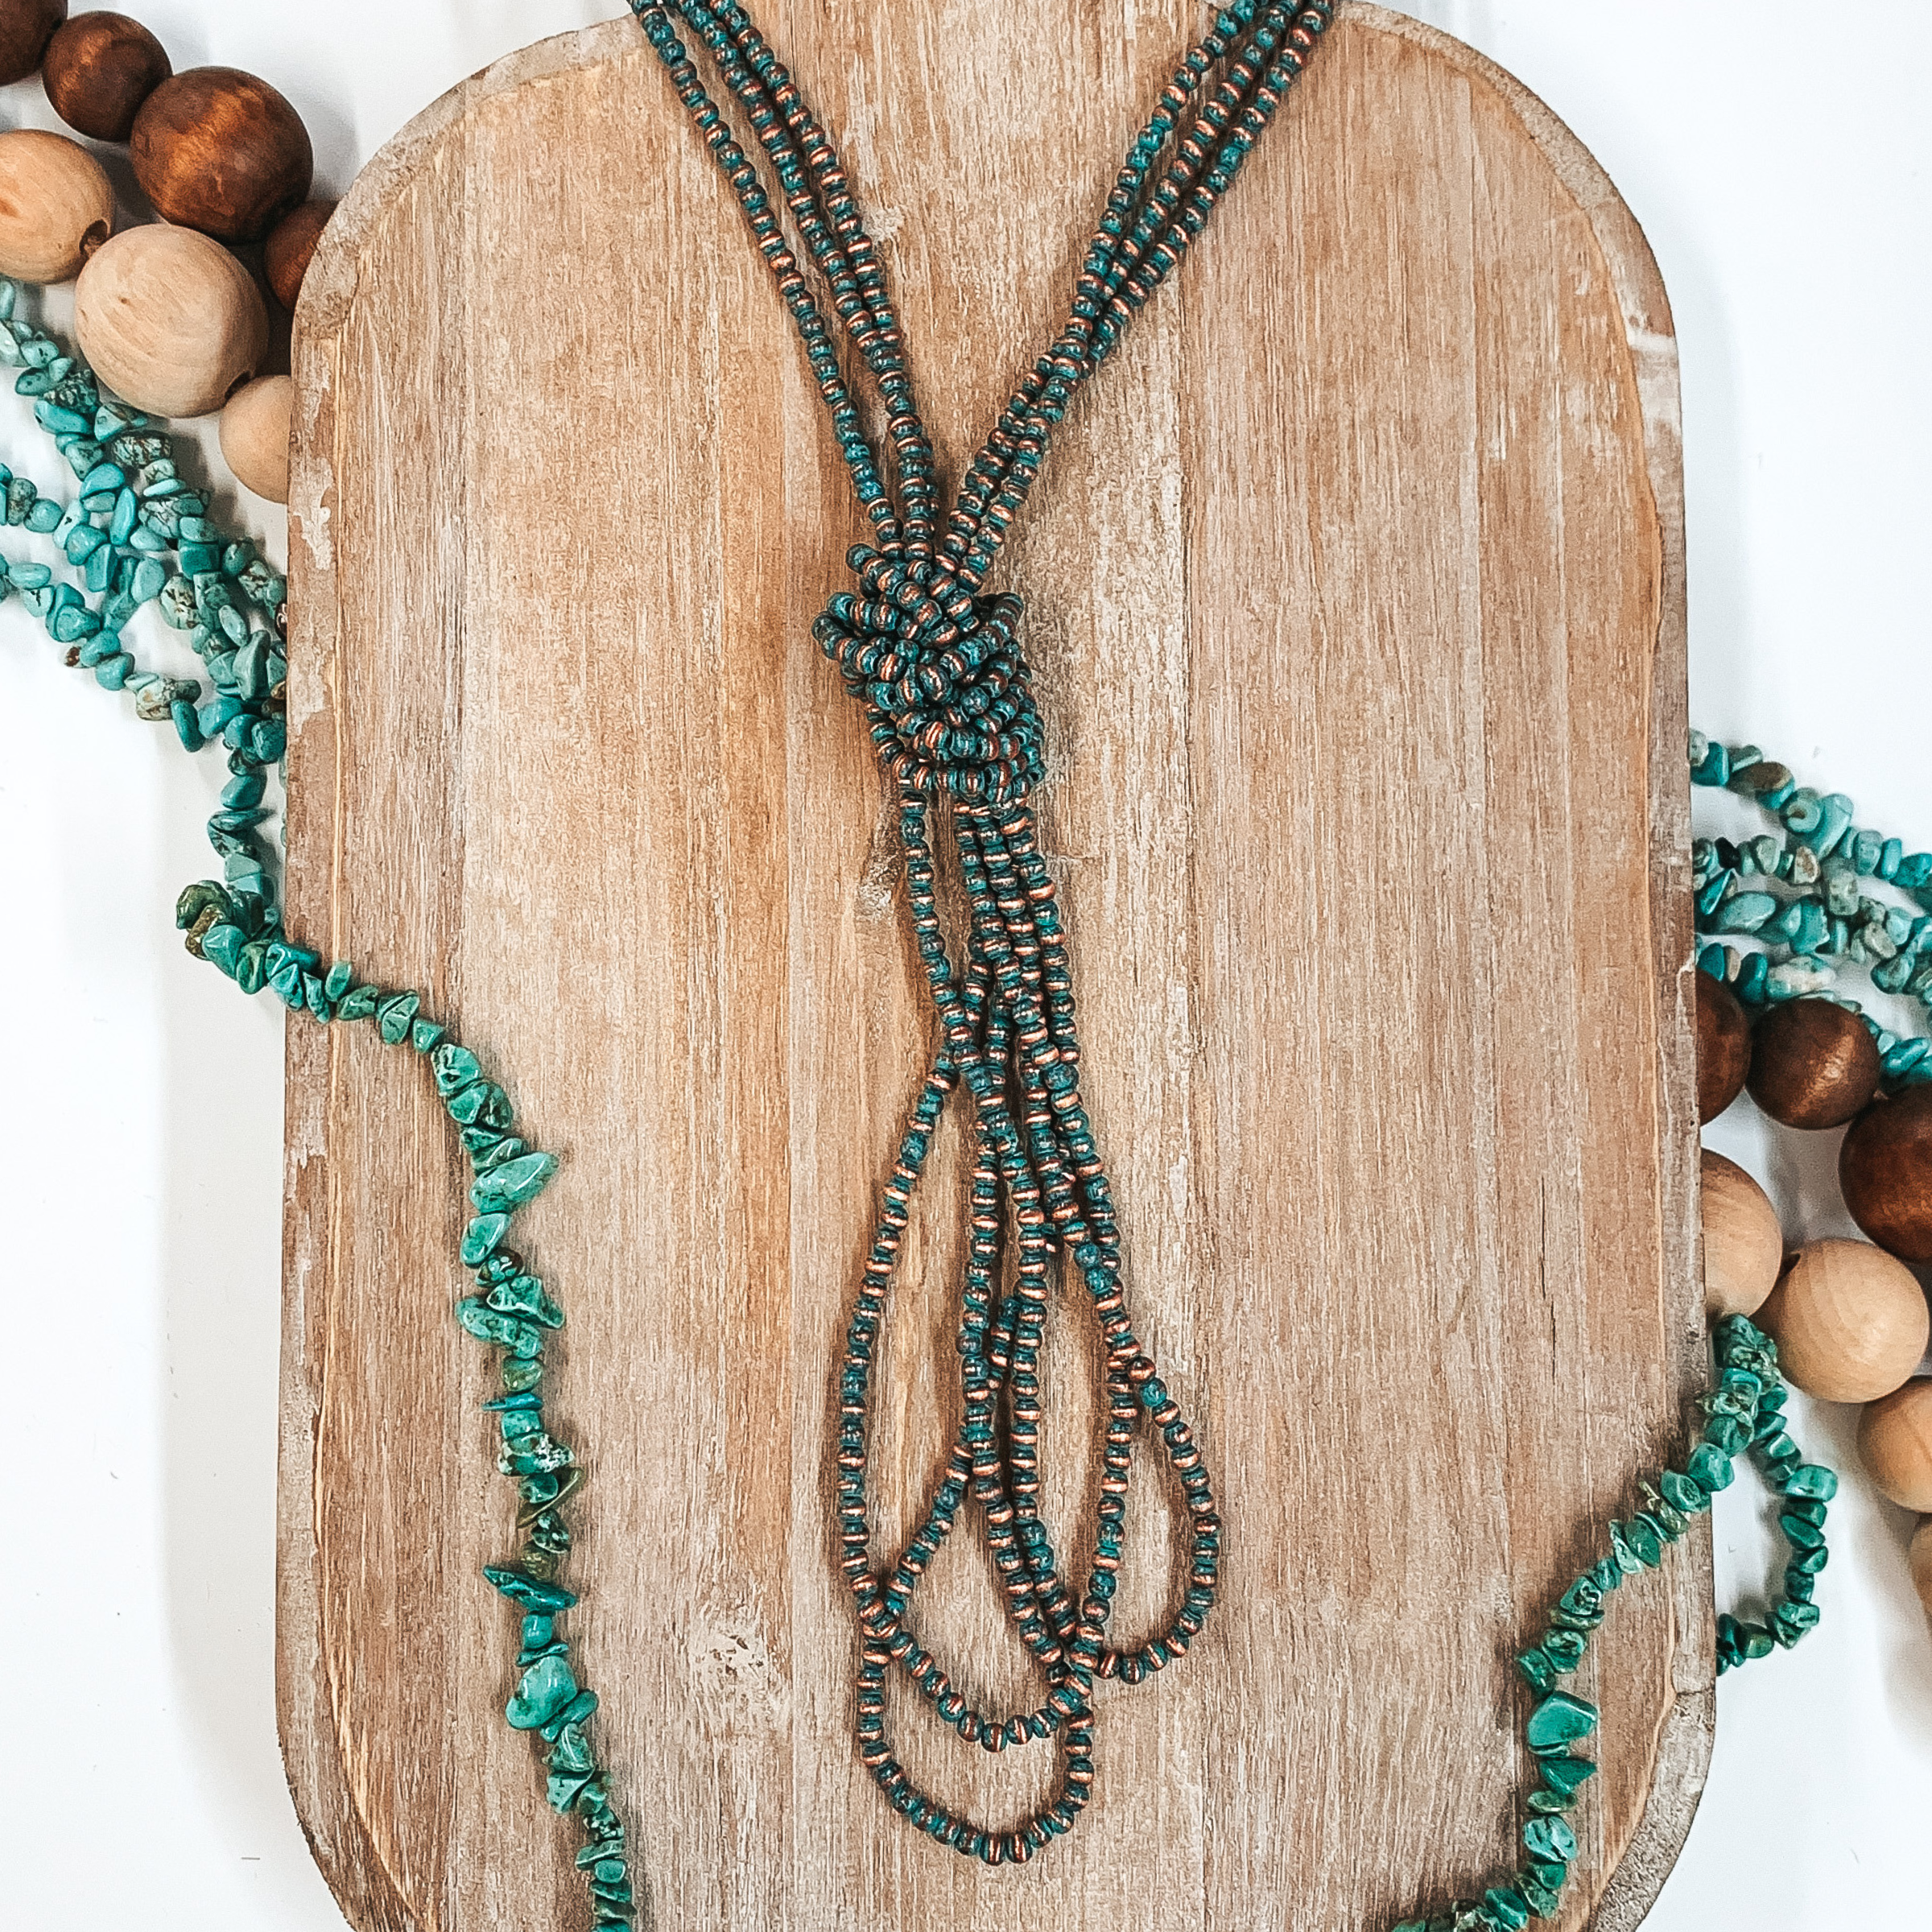 Three Strands of Long Faux Navajo Pearls in Patina Tone - Giddy Up Glamour Boutique